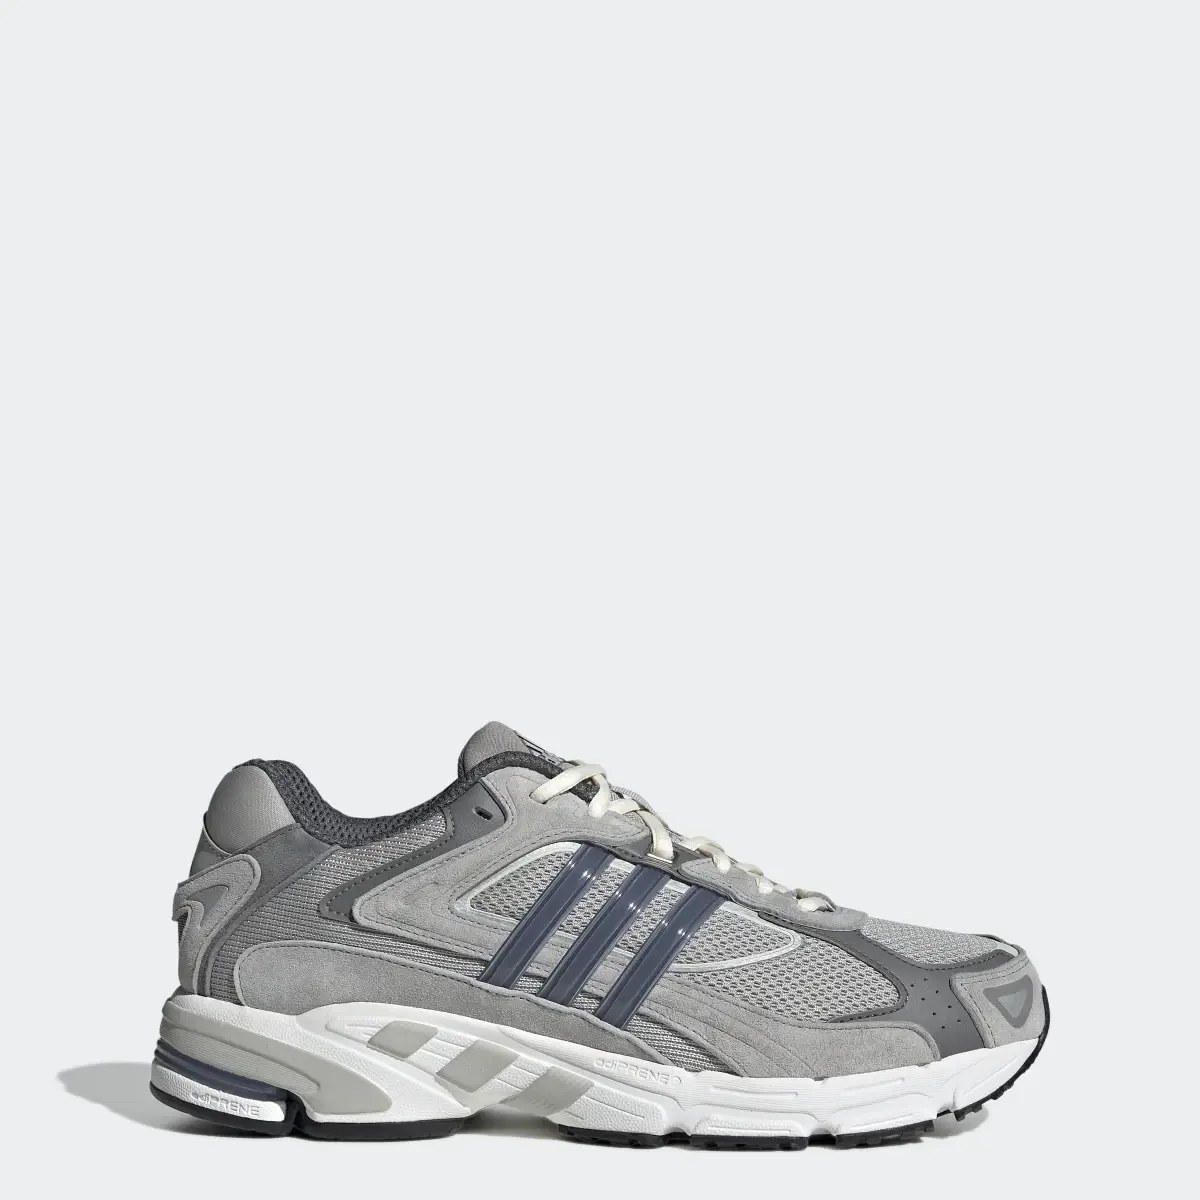 Adidas Chaussure Response CL. 1